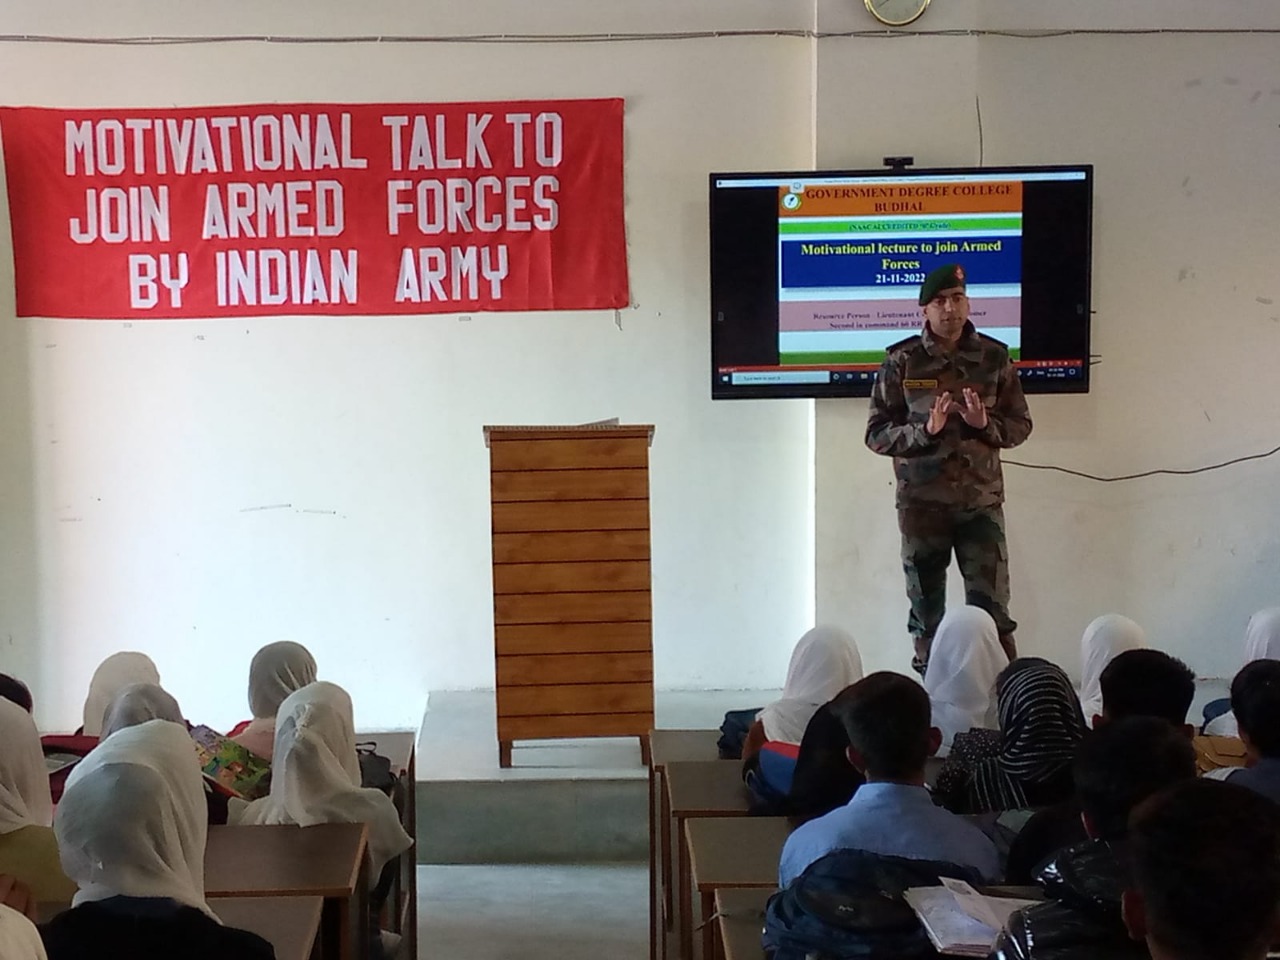 'Indian army organised a lecture on motivational talk to join armed forces at govt degree college budhal'